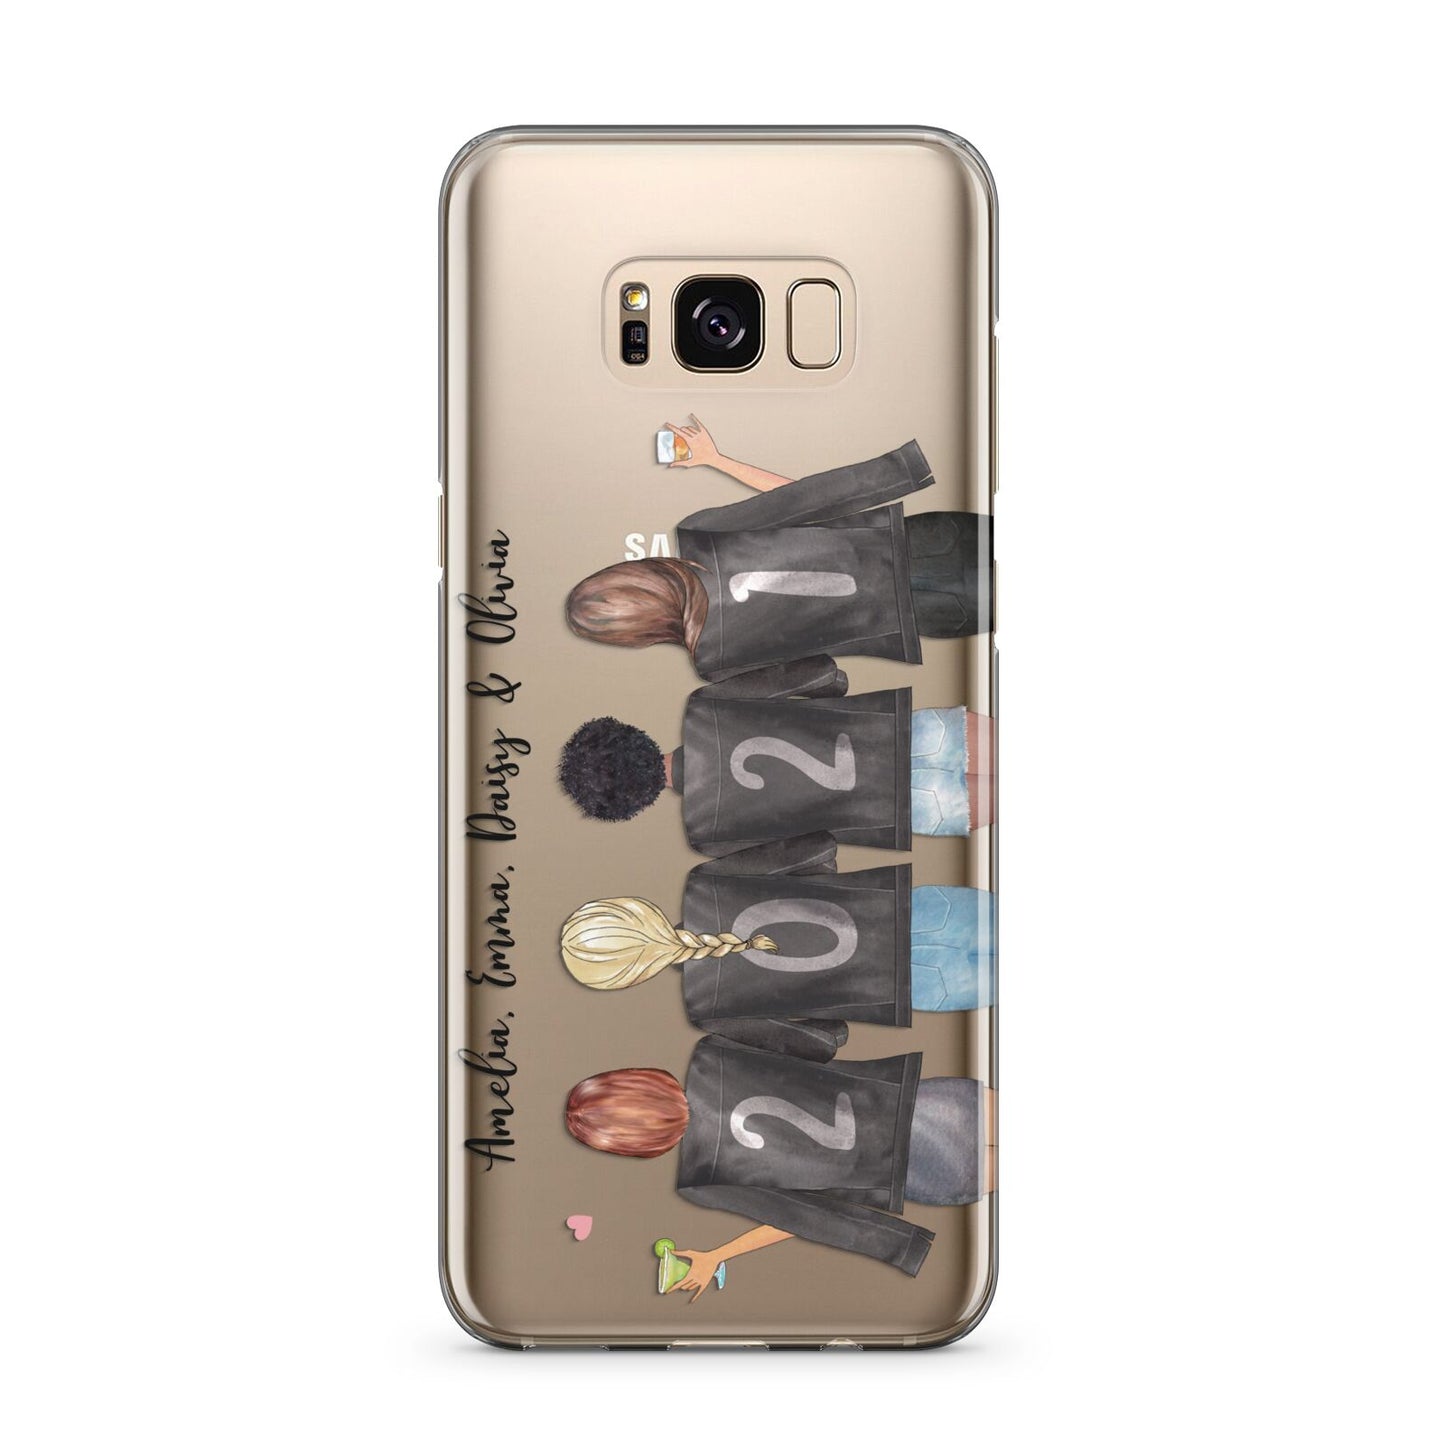 4 Best Friends with Names Samsung Galaxy S8 Plus Case